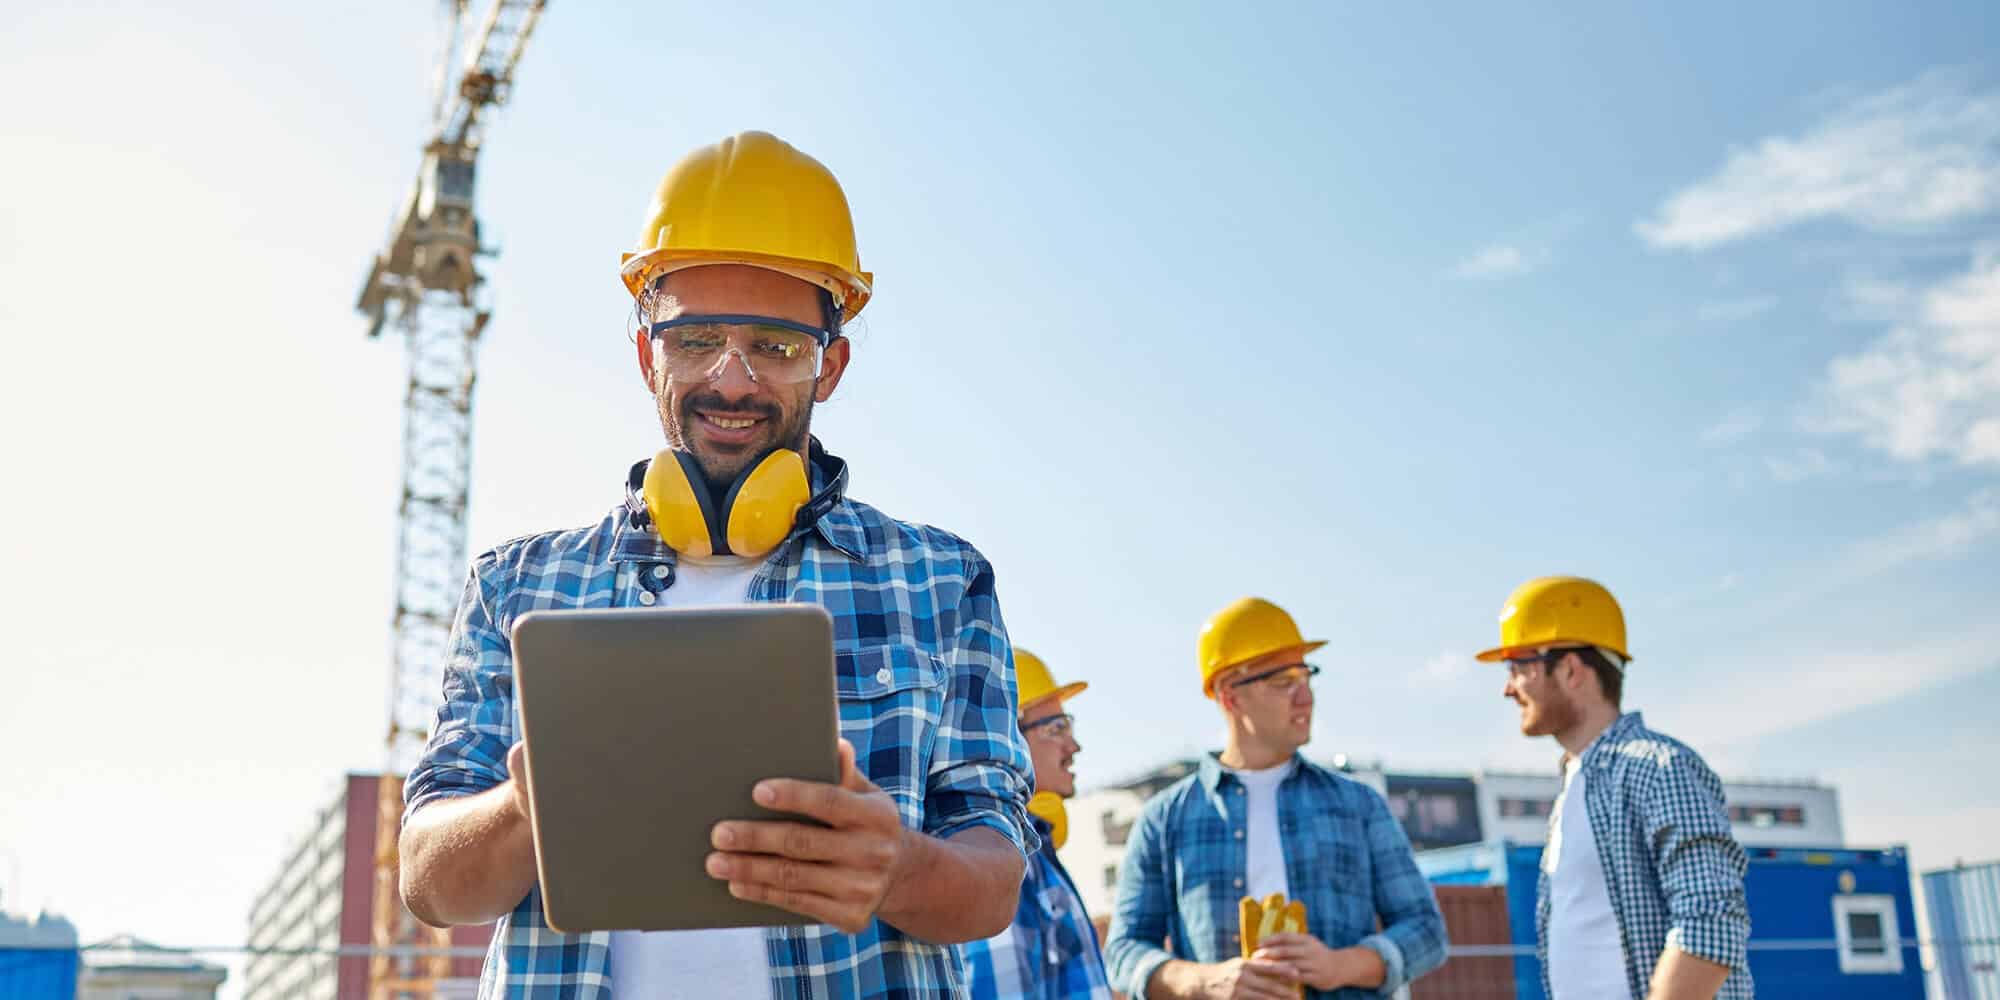 Best practices for construction site safety